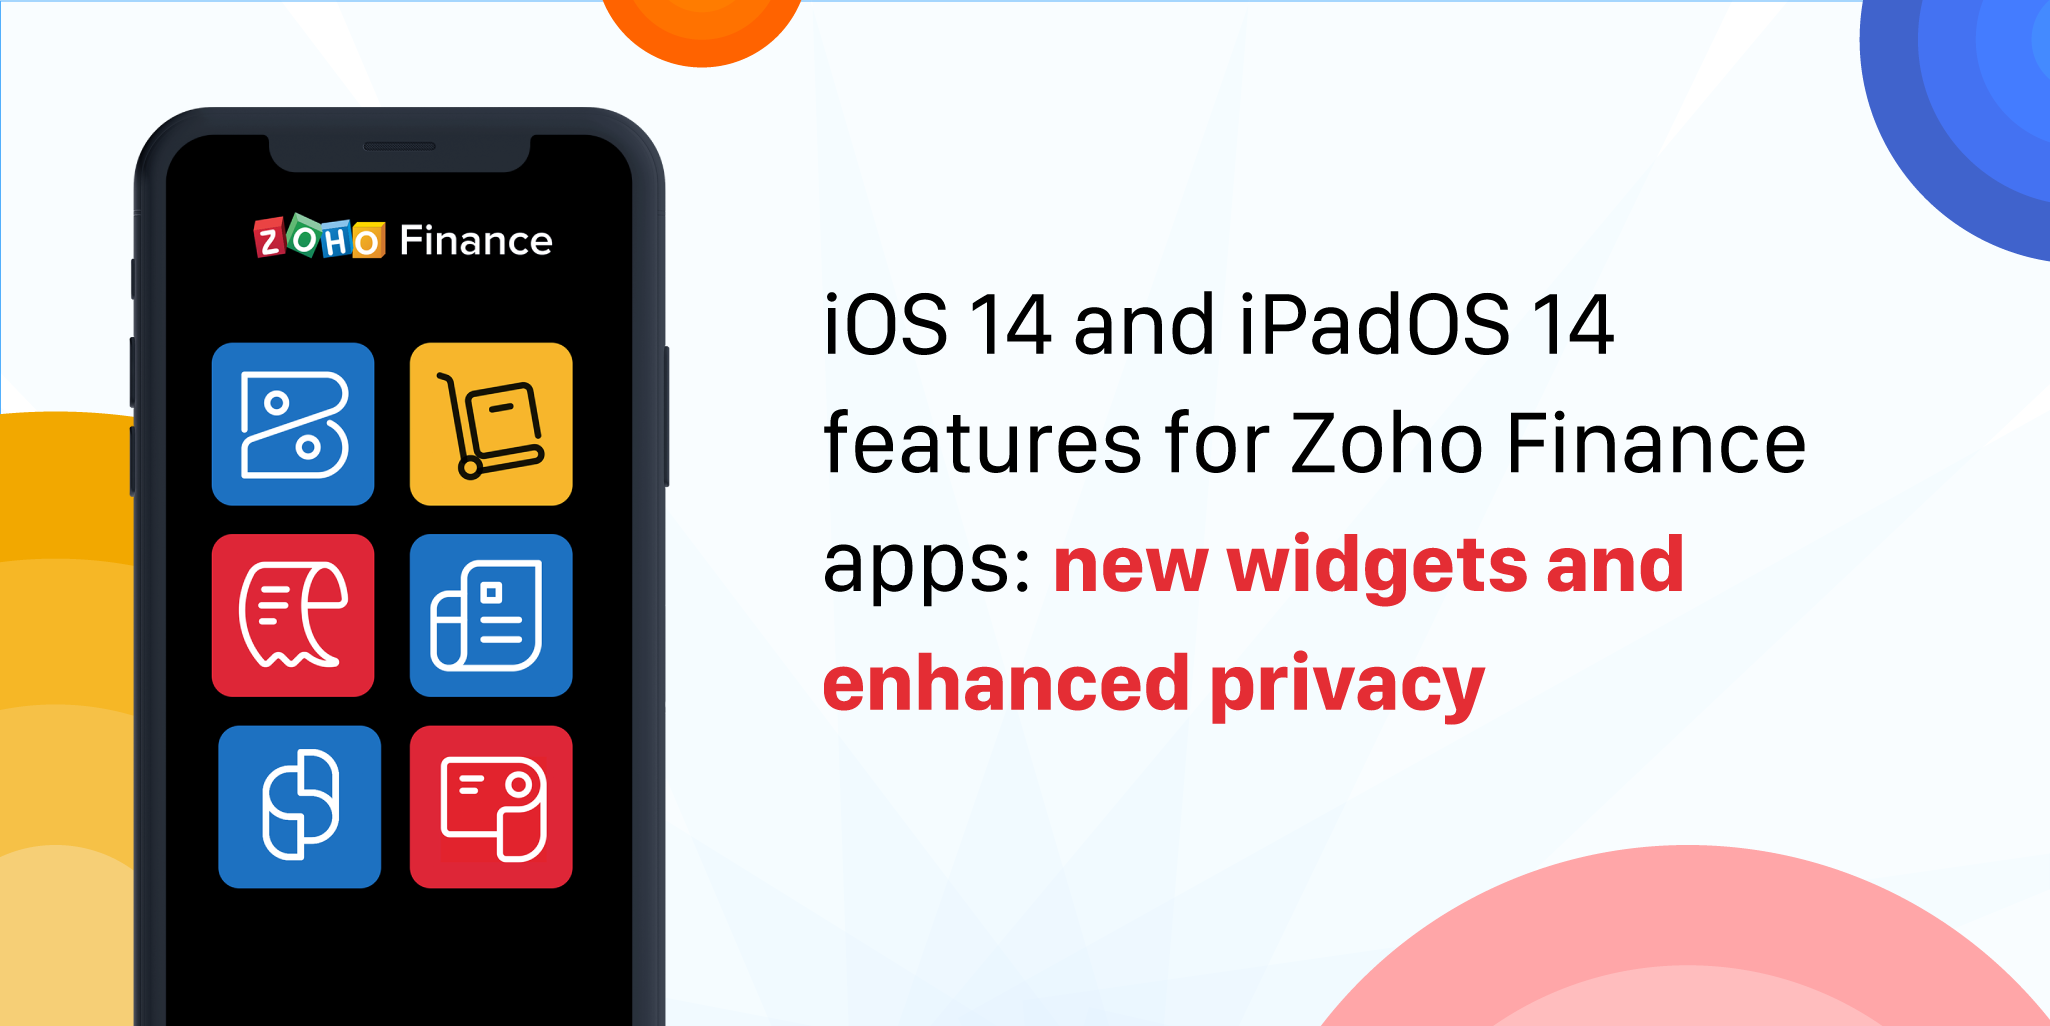 iOS 14 and iPadOS 14 features for Zoho Finance apps: New widgets and enhanced privacy